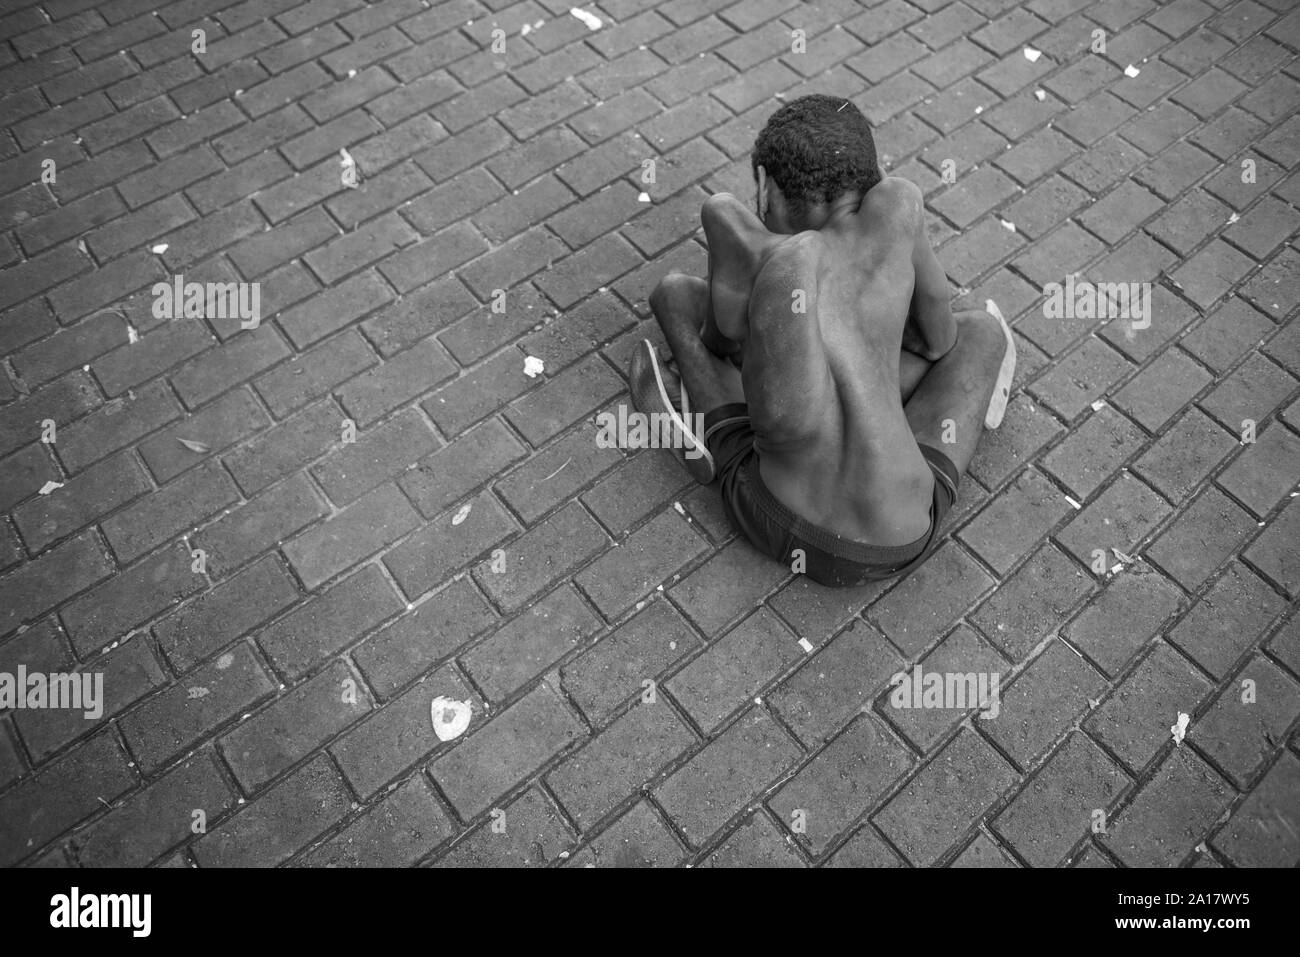 Man with congenital disease seated  in a Recife downtown sidewalk Stock Photo